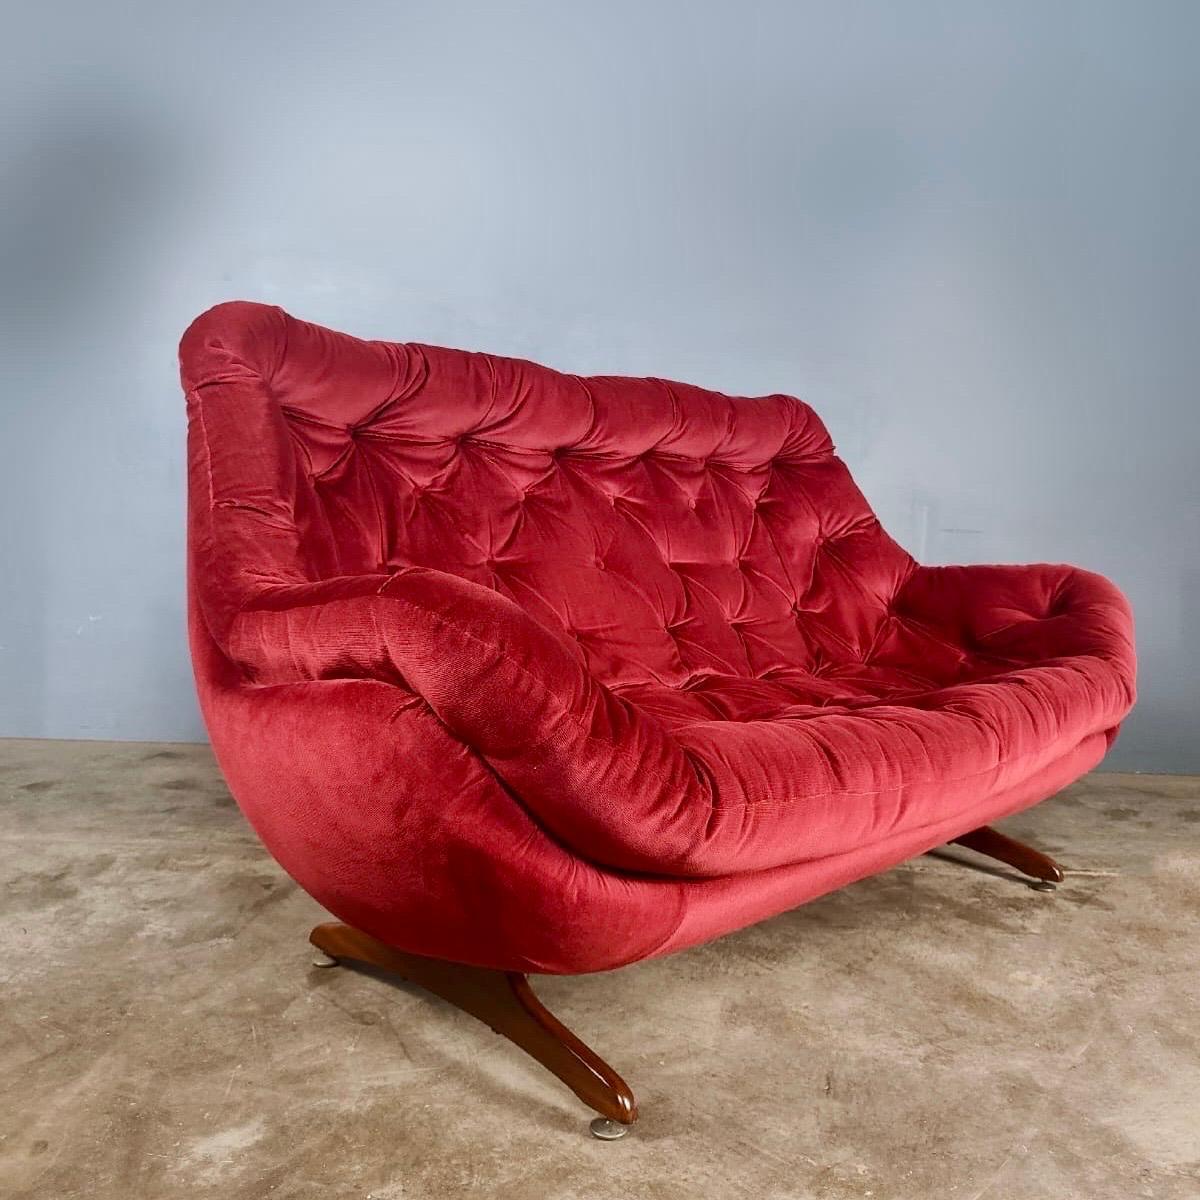 New Stock ✅

2 Seater Pink Red Velvet Egg Sofa Mid Century Vintage Retro MCM

Two seater pink red velvet sofa dating from the late 1960s.

Egg chair is part of a matching set.

With the original pink red velvet upholstery, which has been